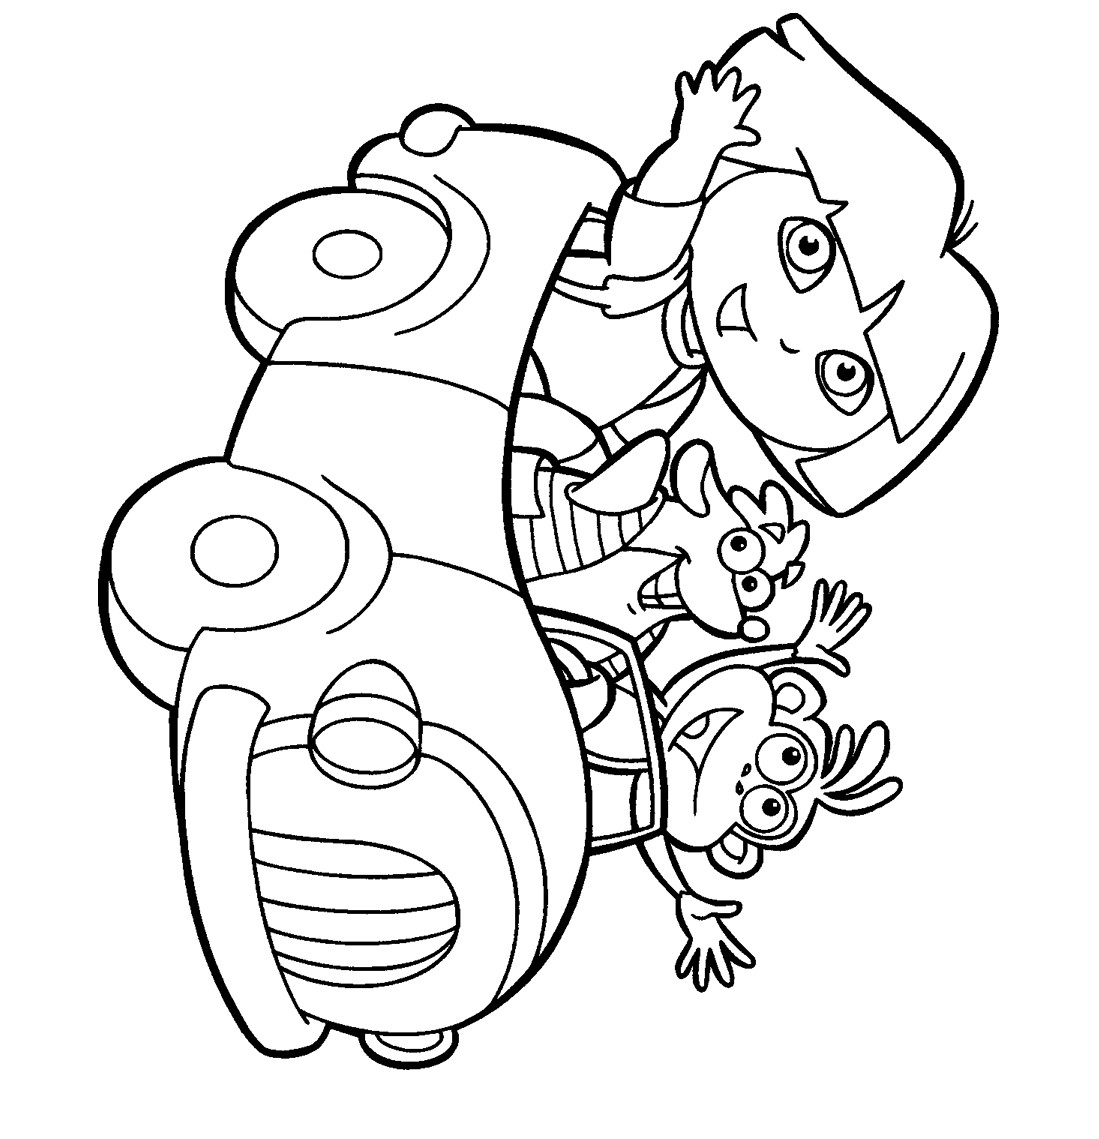 Printable Coloring Pages For Toddlers
 Printable coloring pages for kids